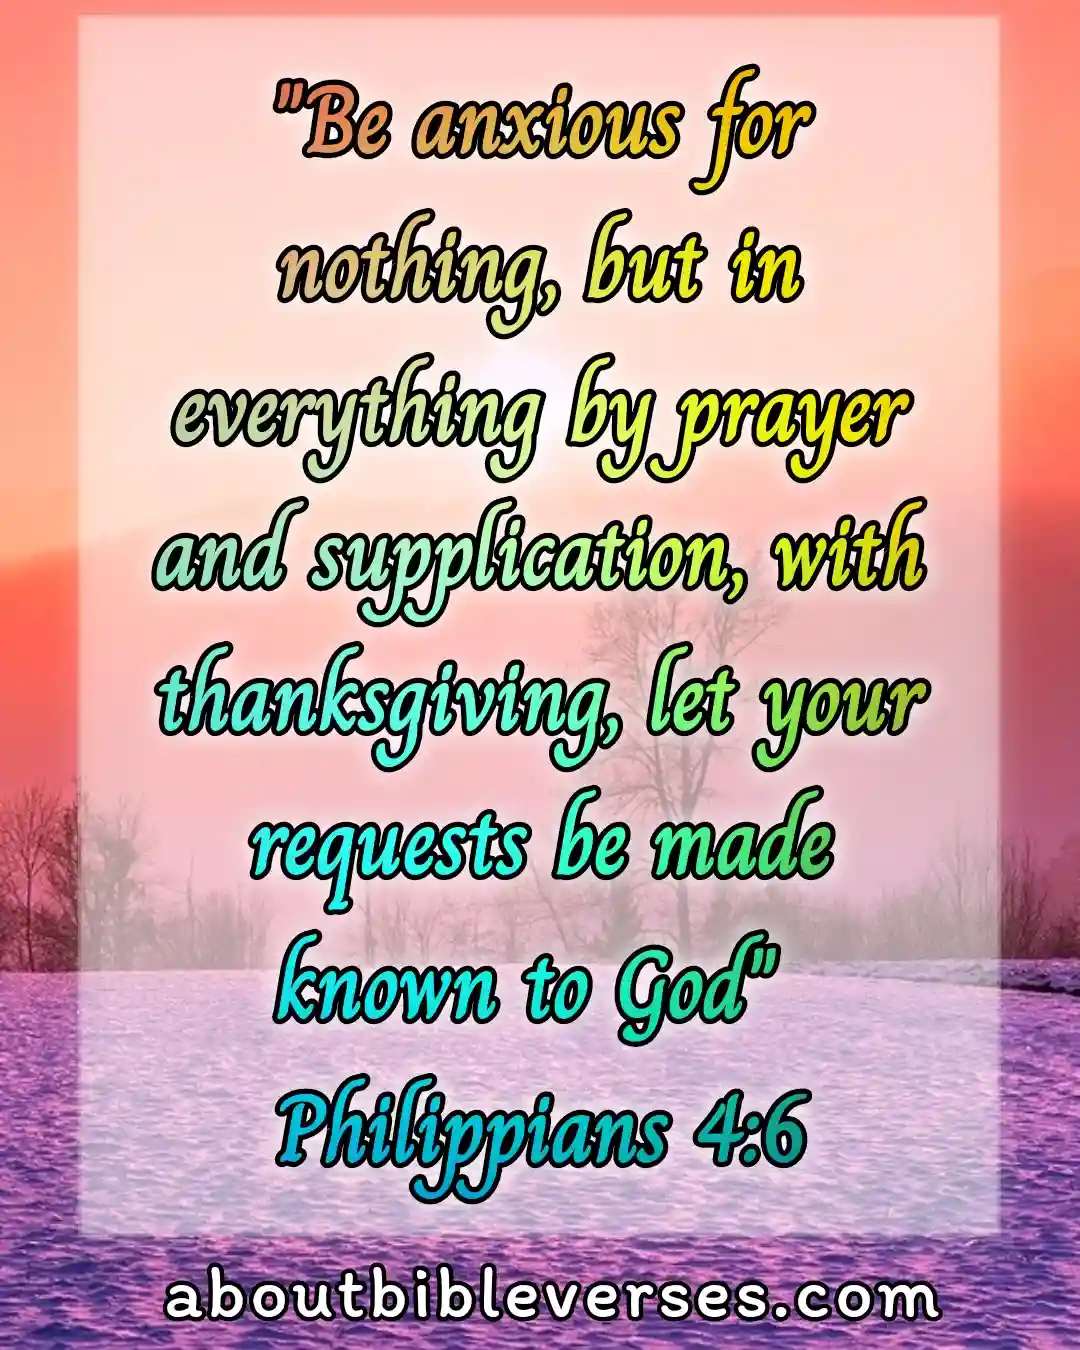 Applying Scripture To Everyday Life (Philippians 4:6)